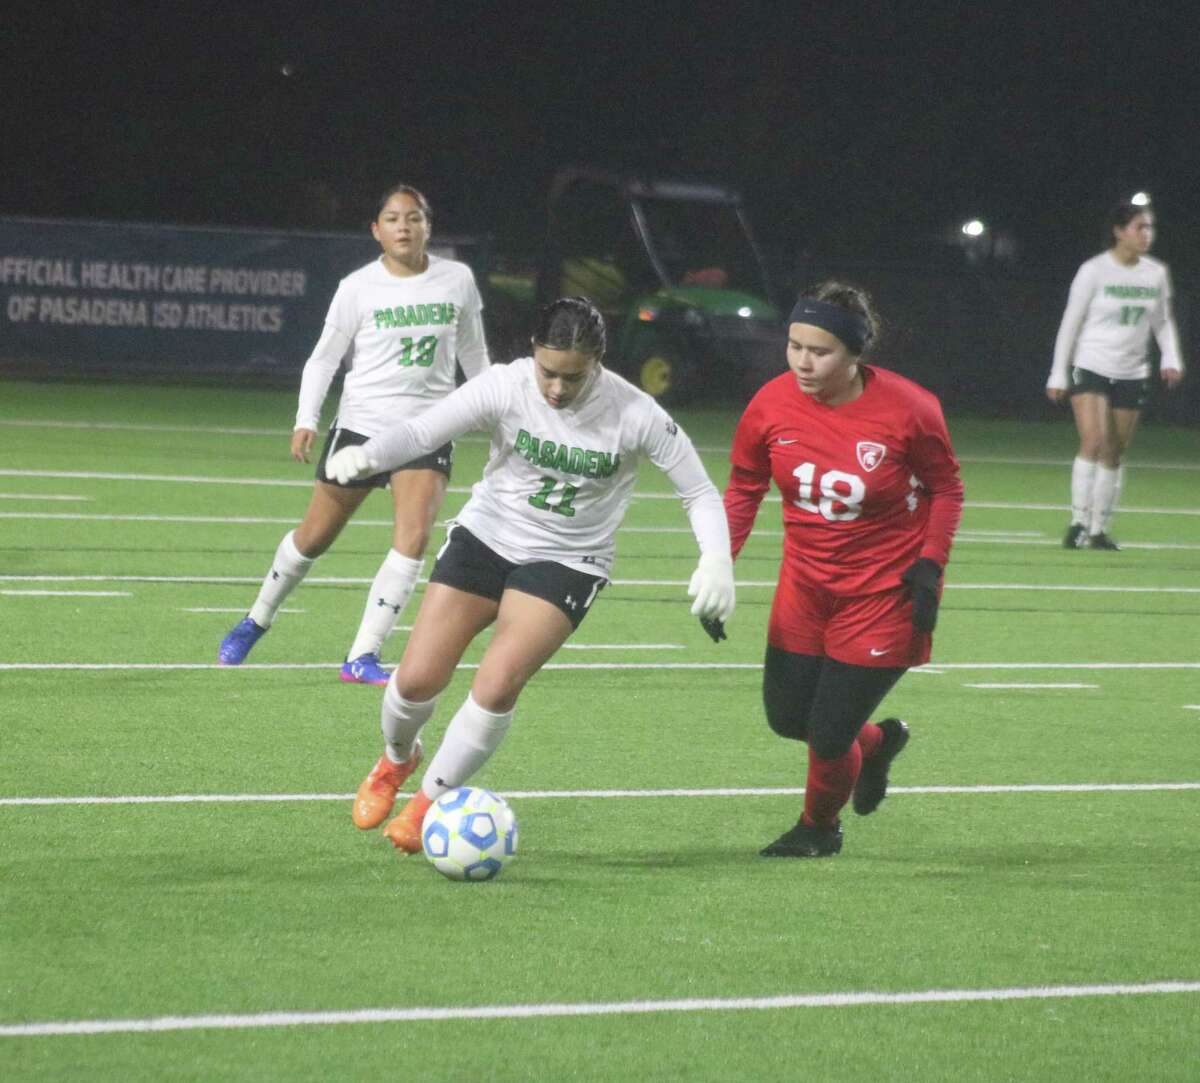 A Lady Eagles attempts to advance the ball up the field during first-half action Monday night at Veterans Memorial Stadium.